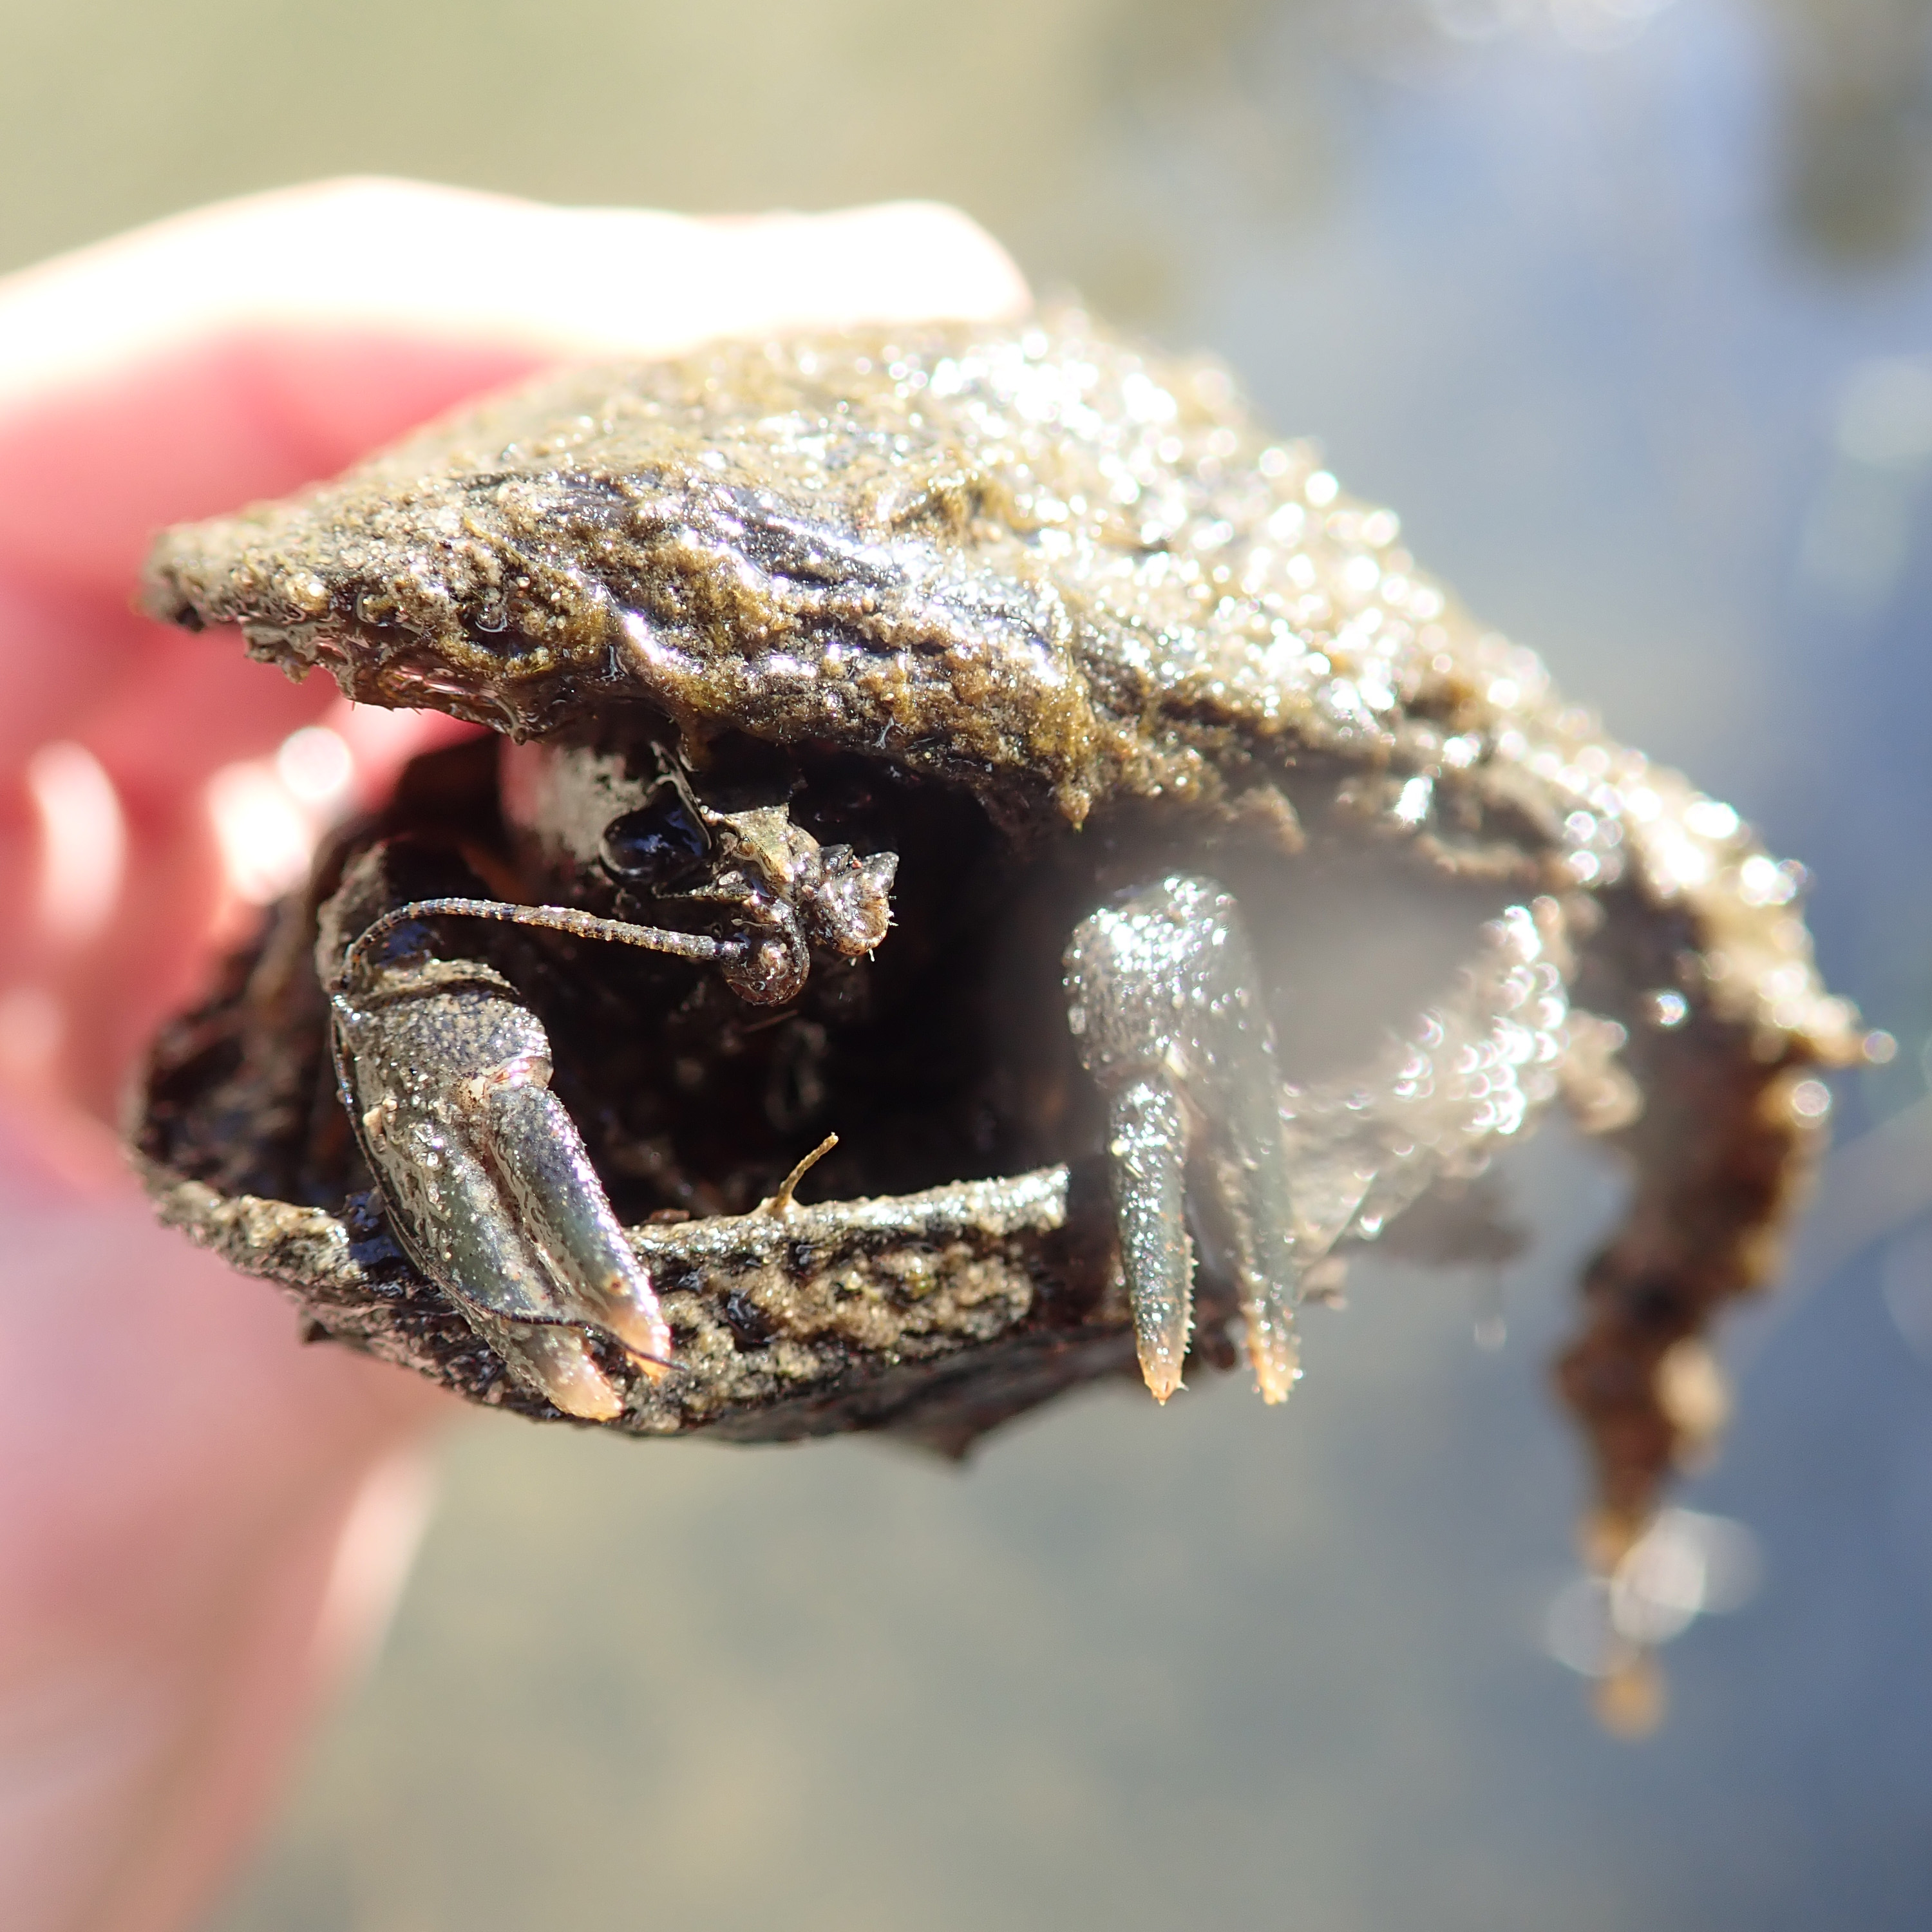 A shell with a lot of texture, being held aloft in someone's hand, has a crayfish's face and claws poking out!